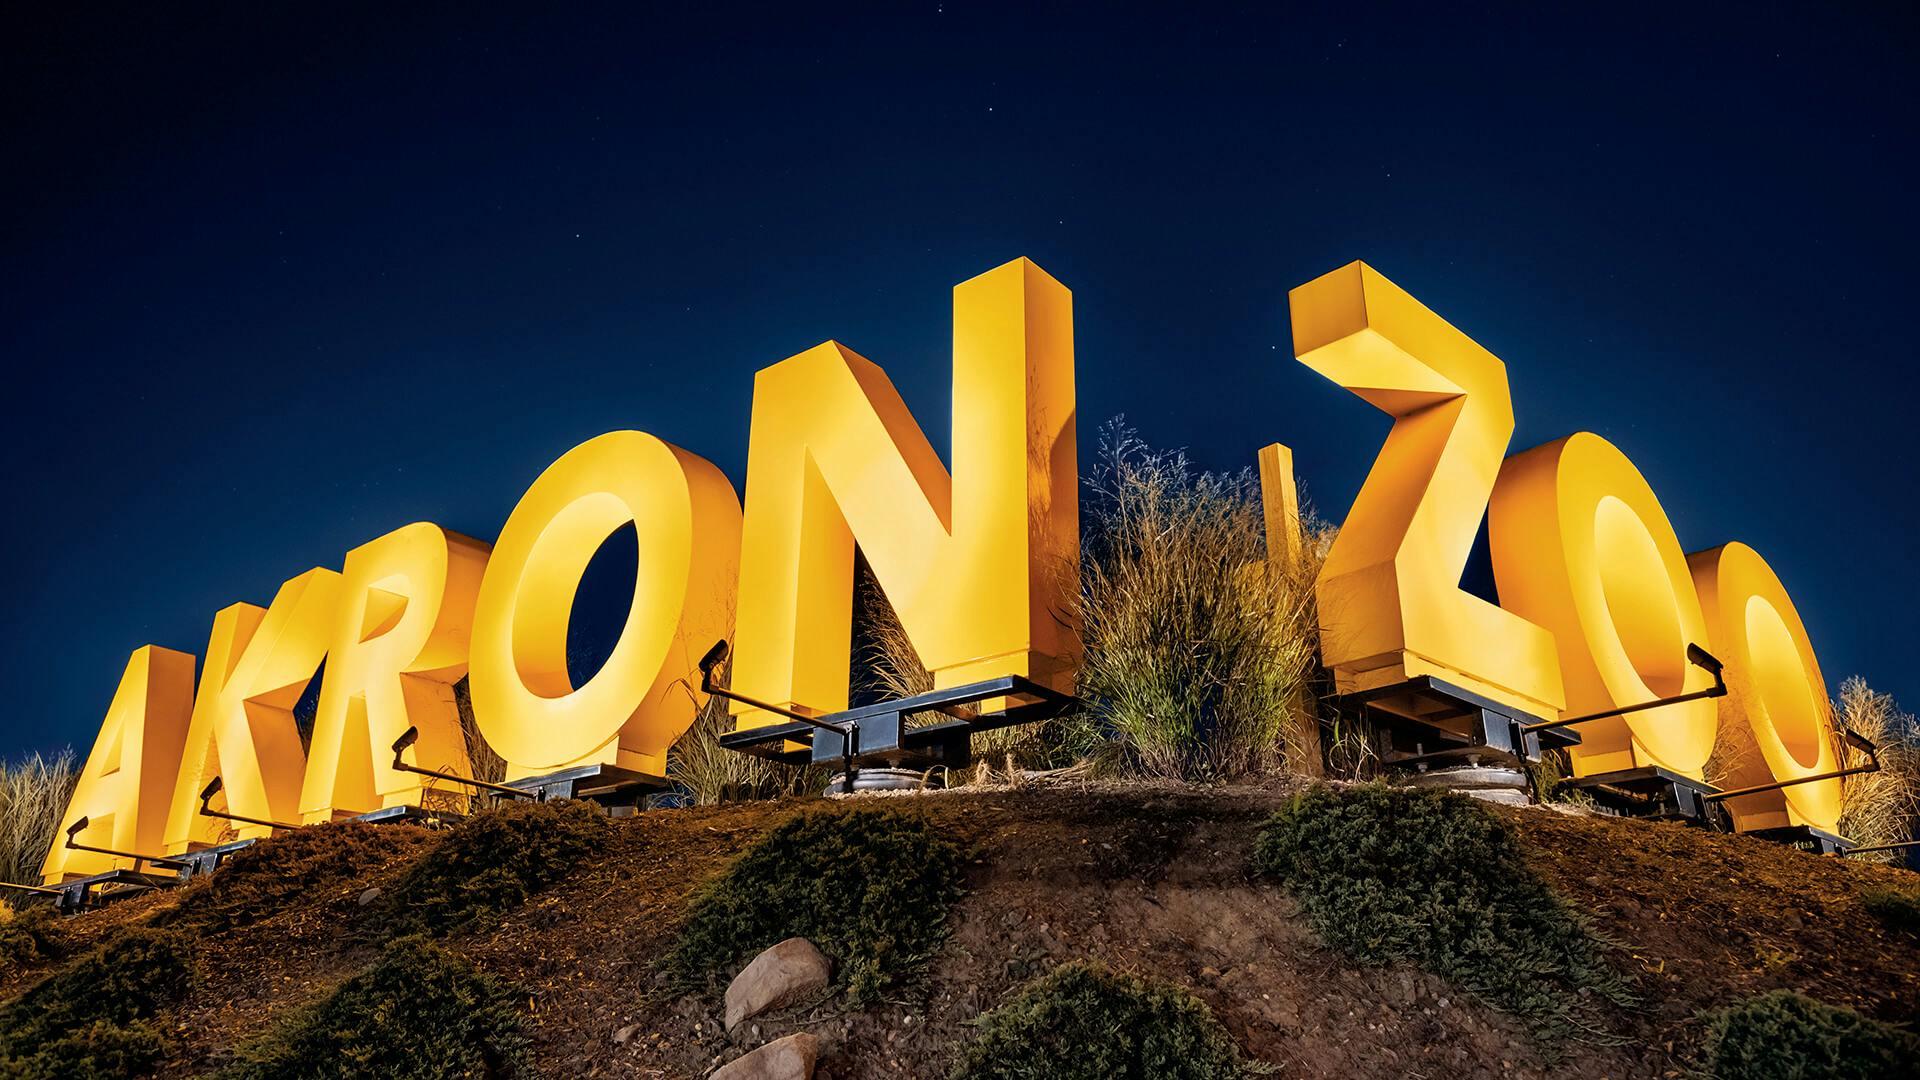 Akron Zoo outdoor sign made up of large yellow letters with uplighting on each letter at night